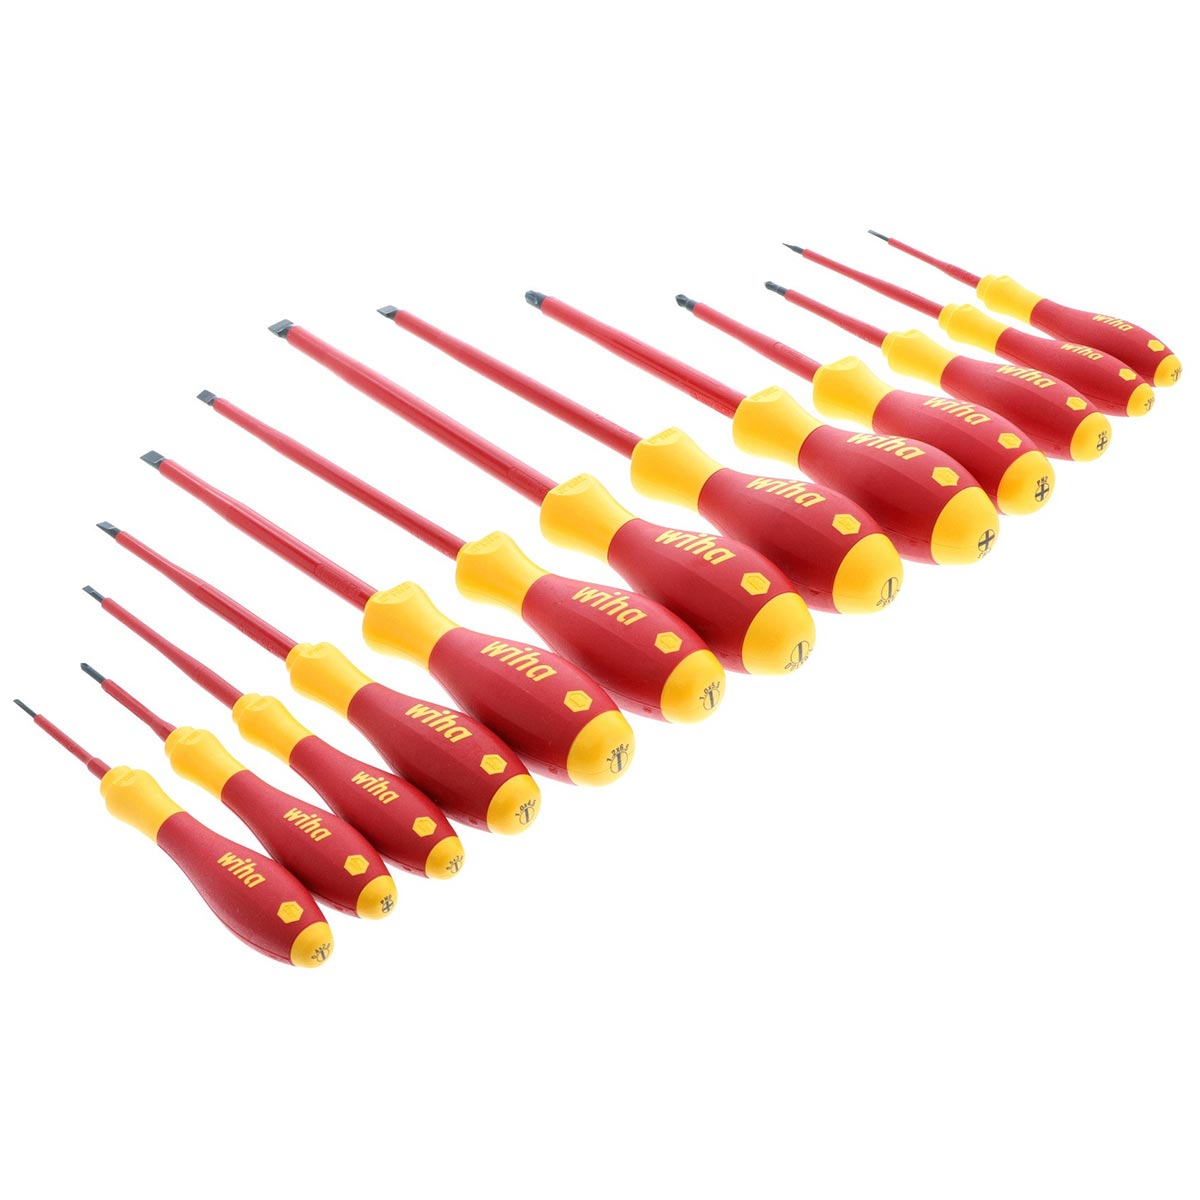 Wiha Insulated Cushioned Grip Slotted/phillips Screwdrivers - 13 Piece Set